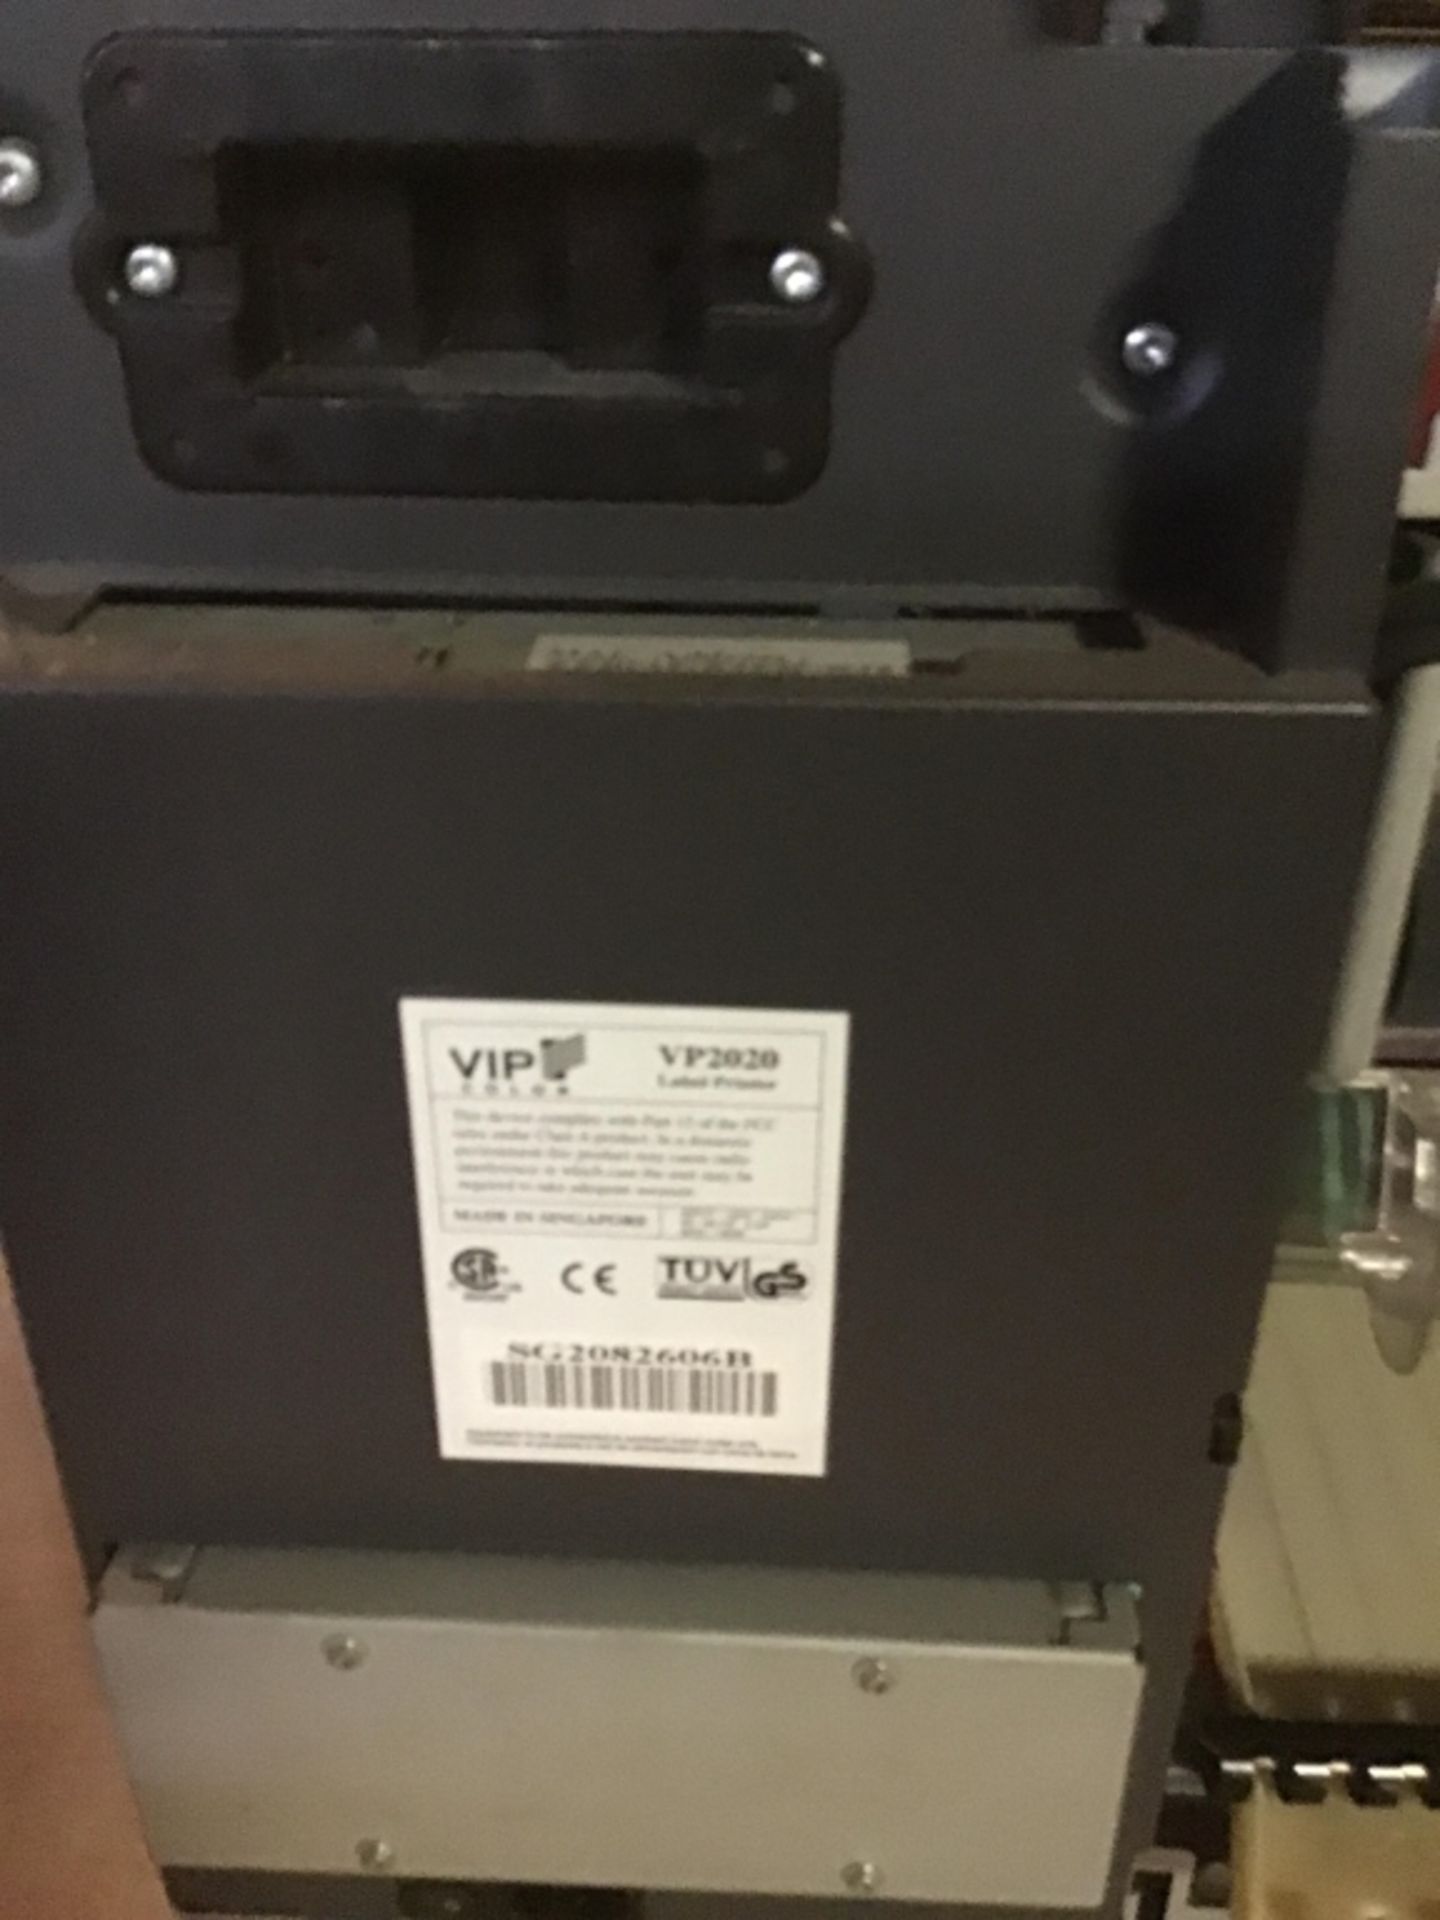 HP VP 2020 Digital color label printer no power cords present, seems to be leaking ink - Image 3 of 3